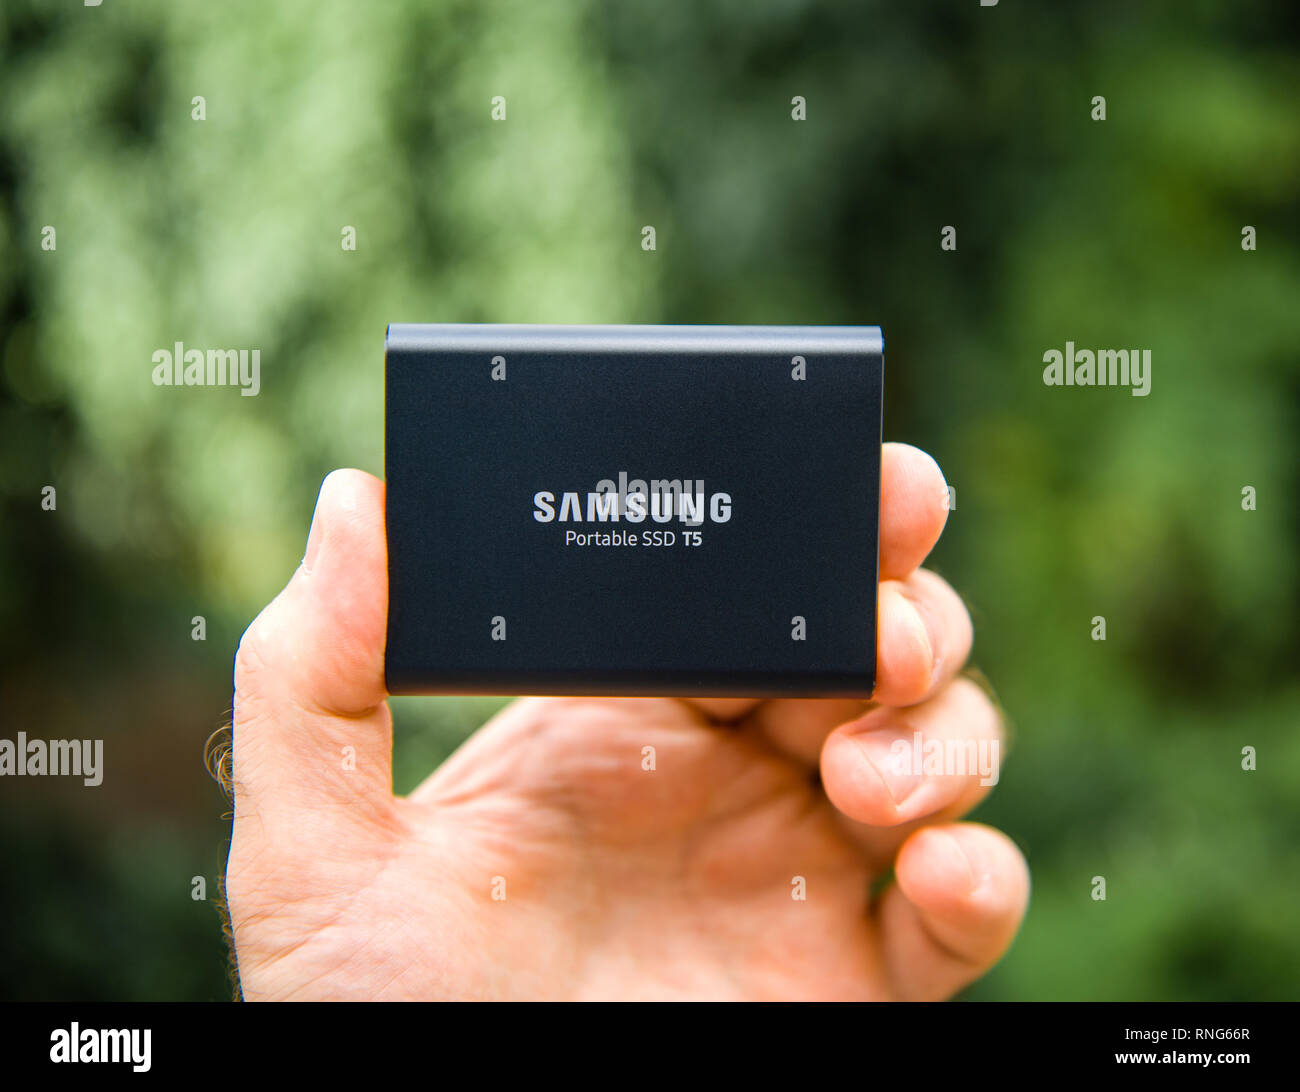 PARIS, FRANCE - AUG 14, 2018: Man hand holding Samsung T5 Portable SSD 2 tb external hard drive disk with high read and write speed against green background unboxing testing  Stock Photo